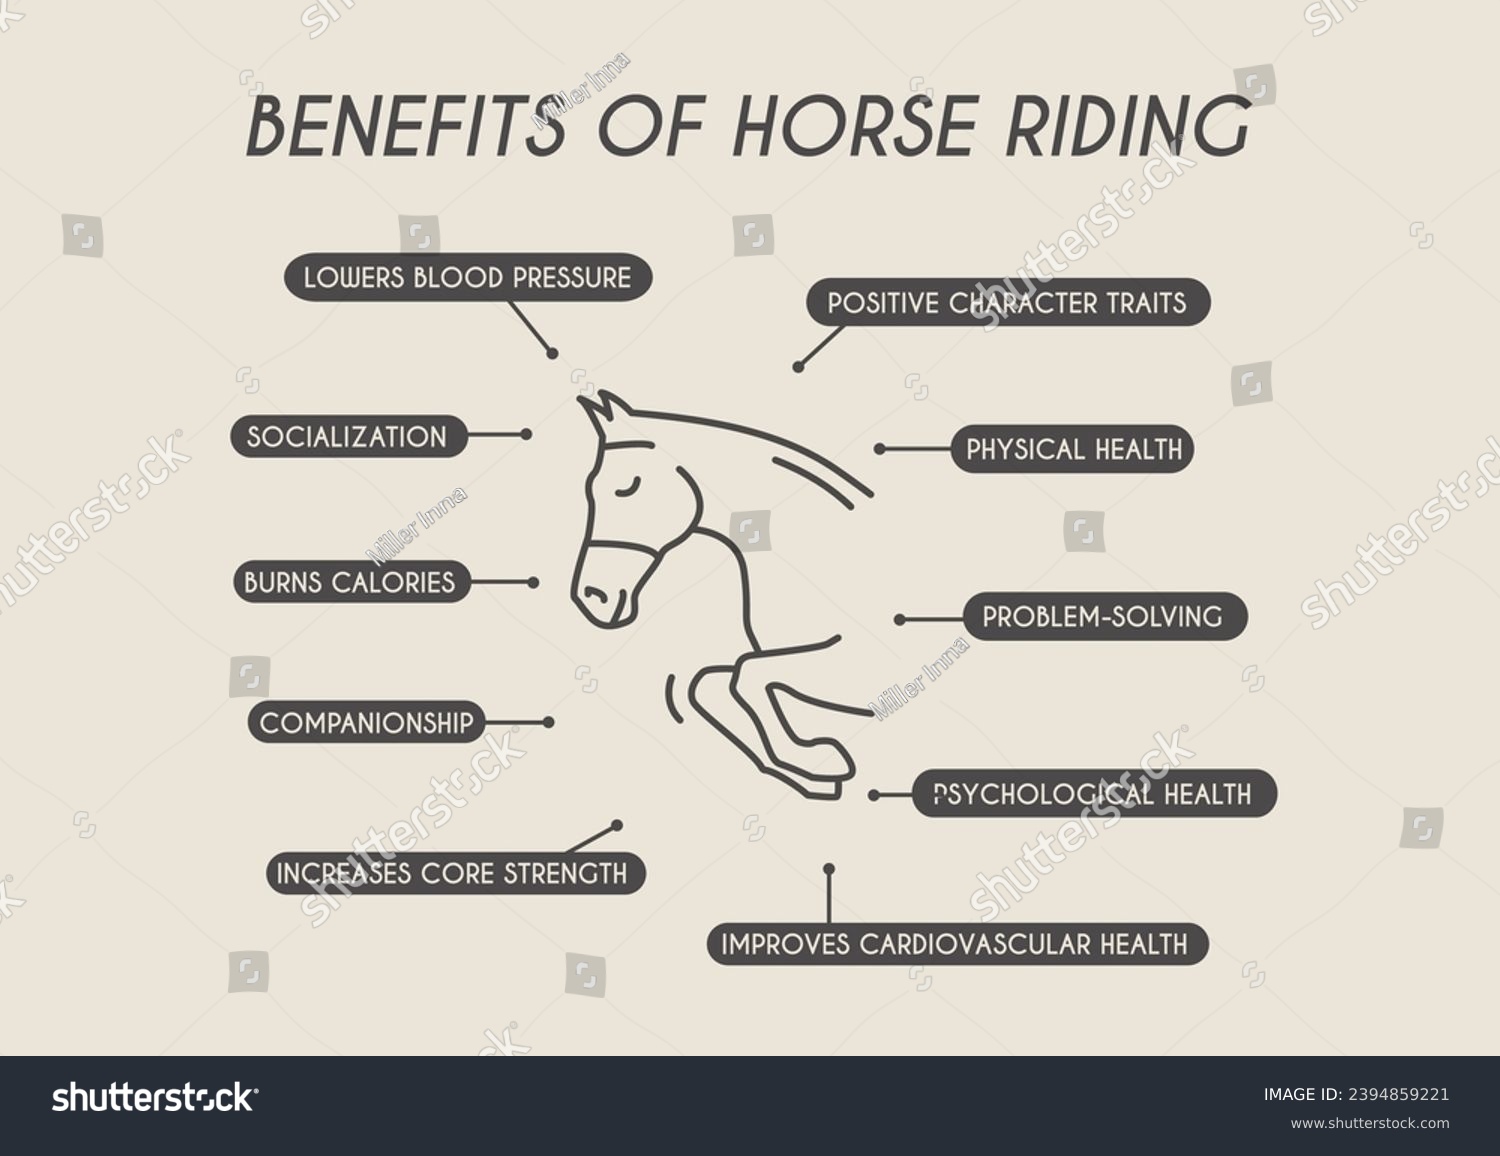 SVG of Benefits of horse riding. Equestrian infographic with outline icon and educational information. Physical and Mental Health for Horseback riders. Vector illustration. svg